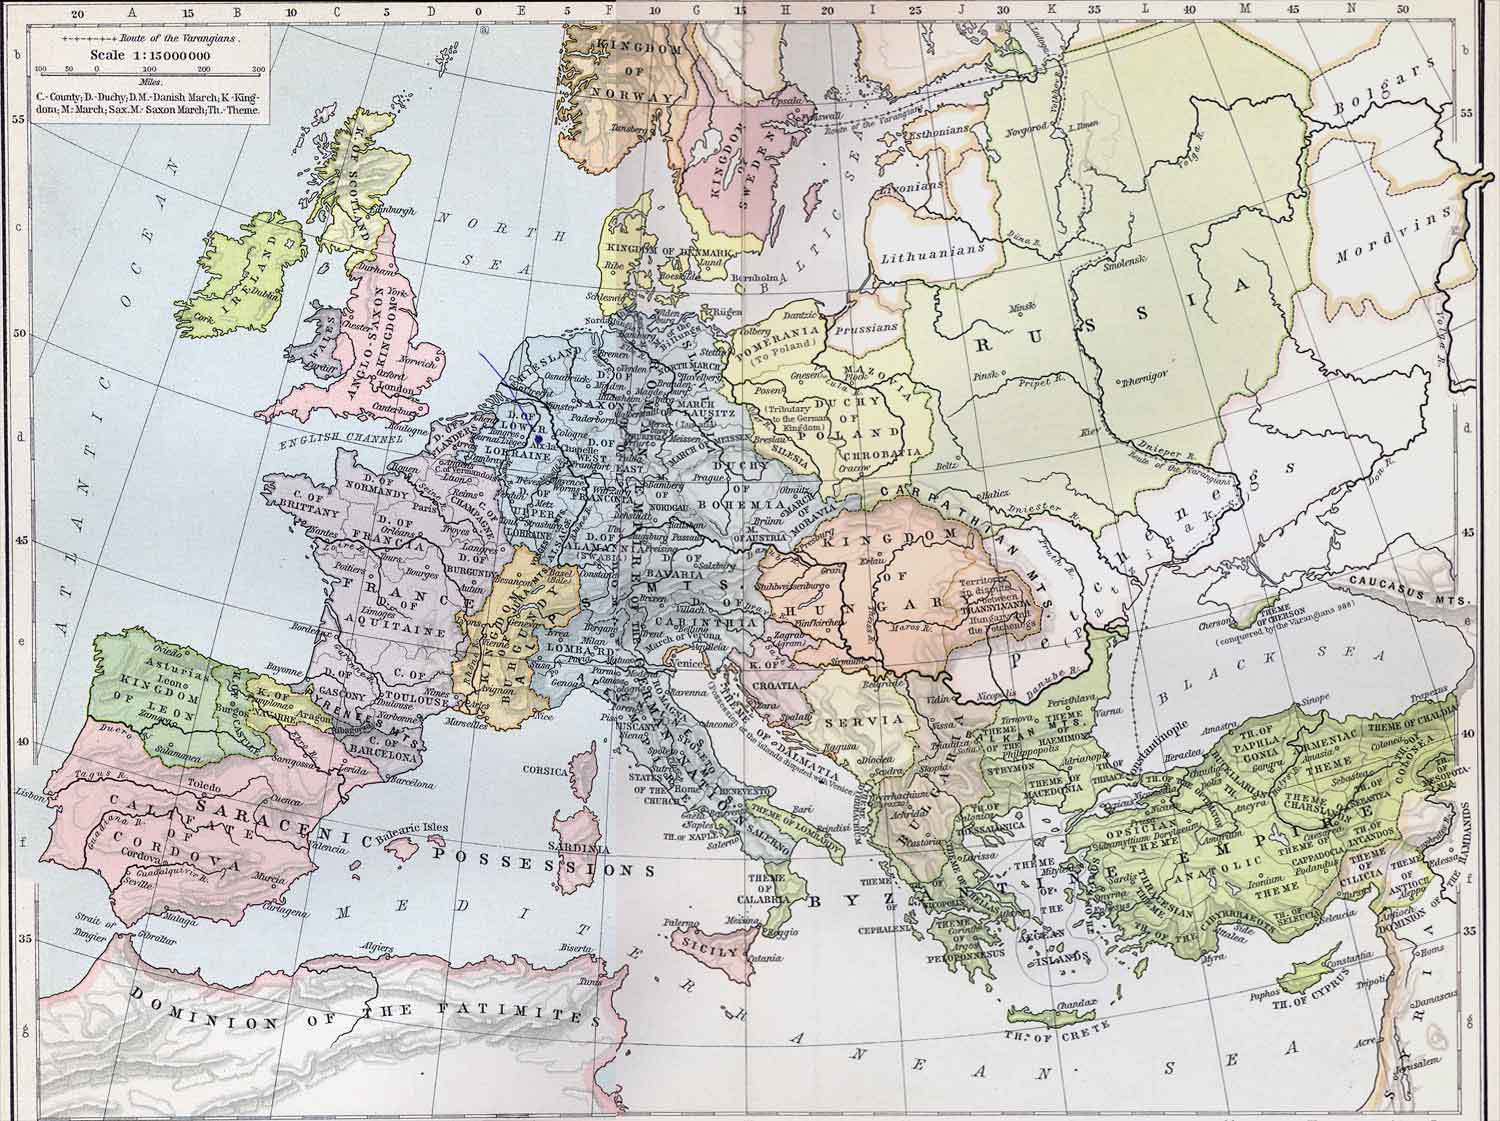 Europe and the Byzantine Empire